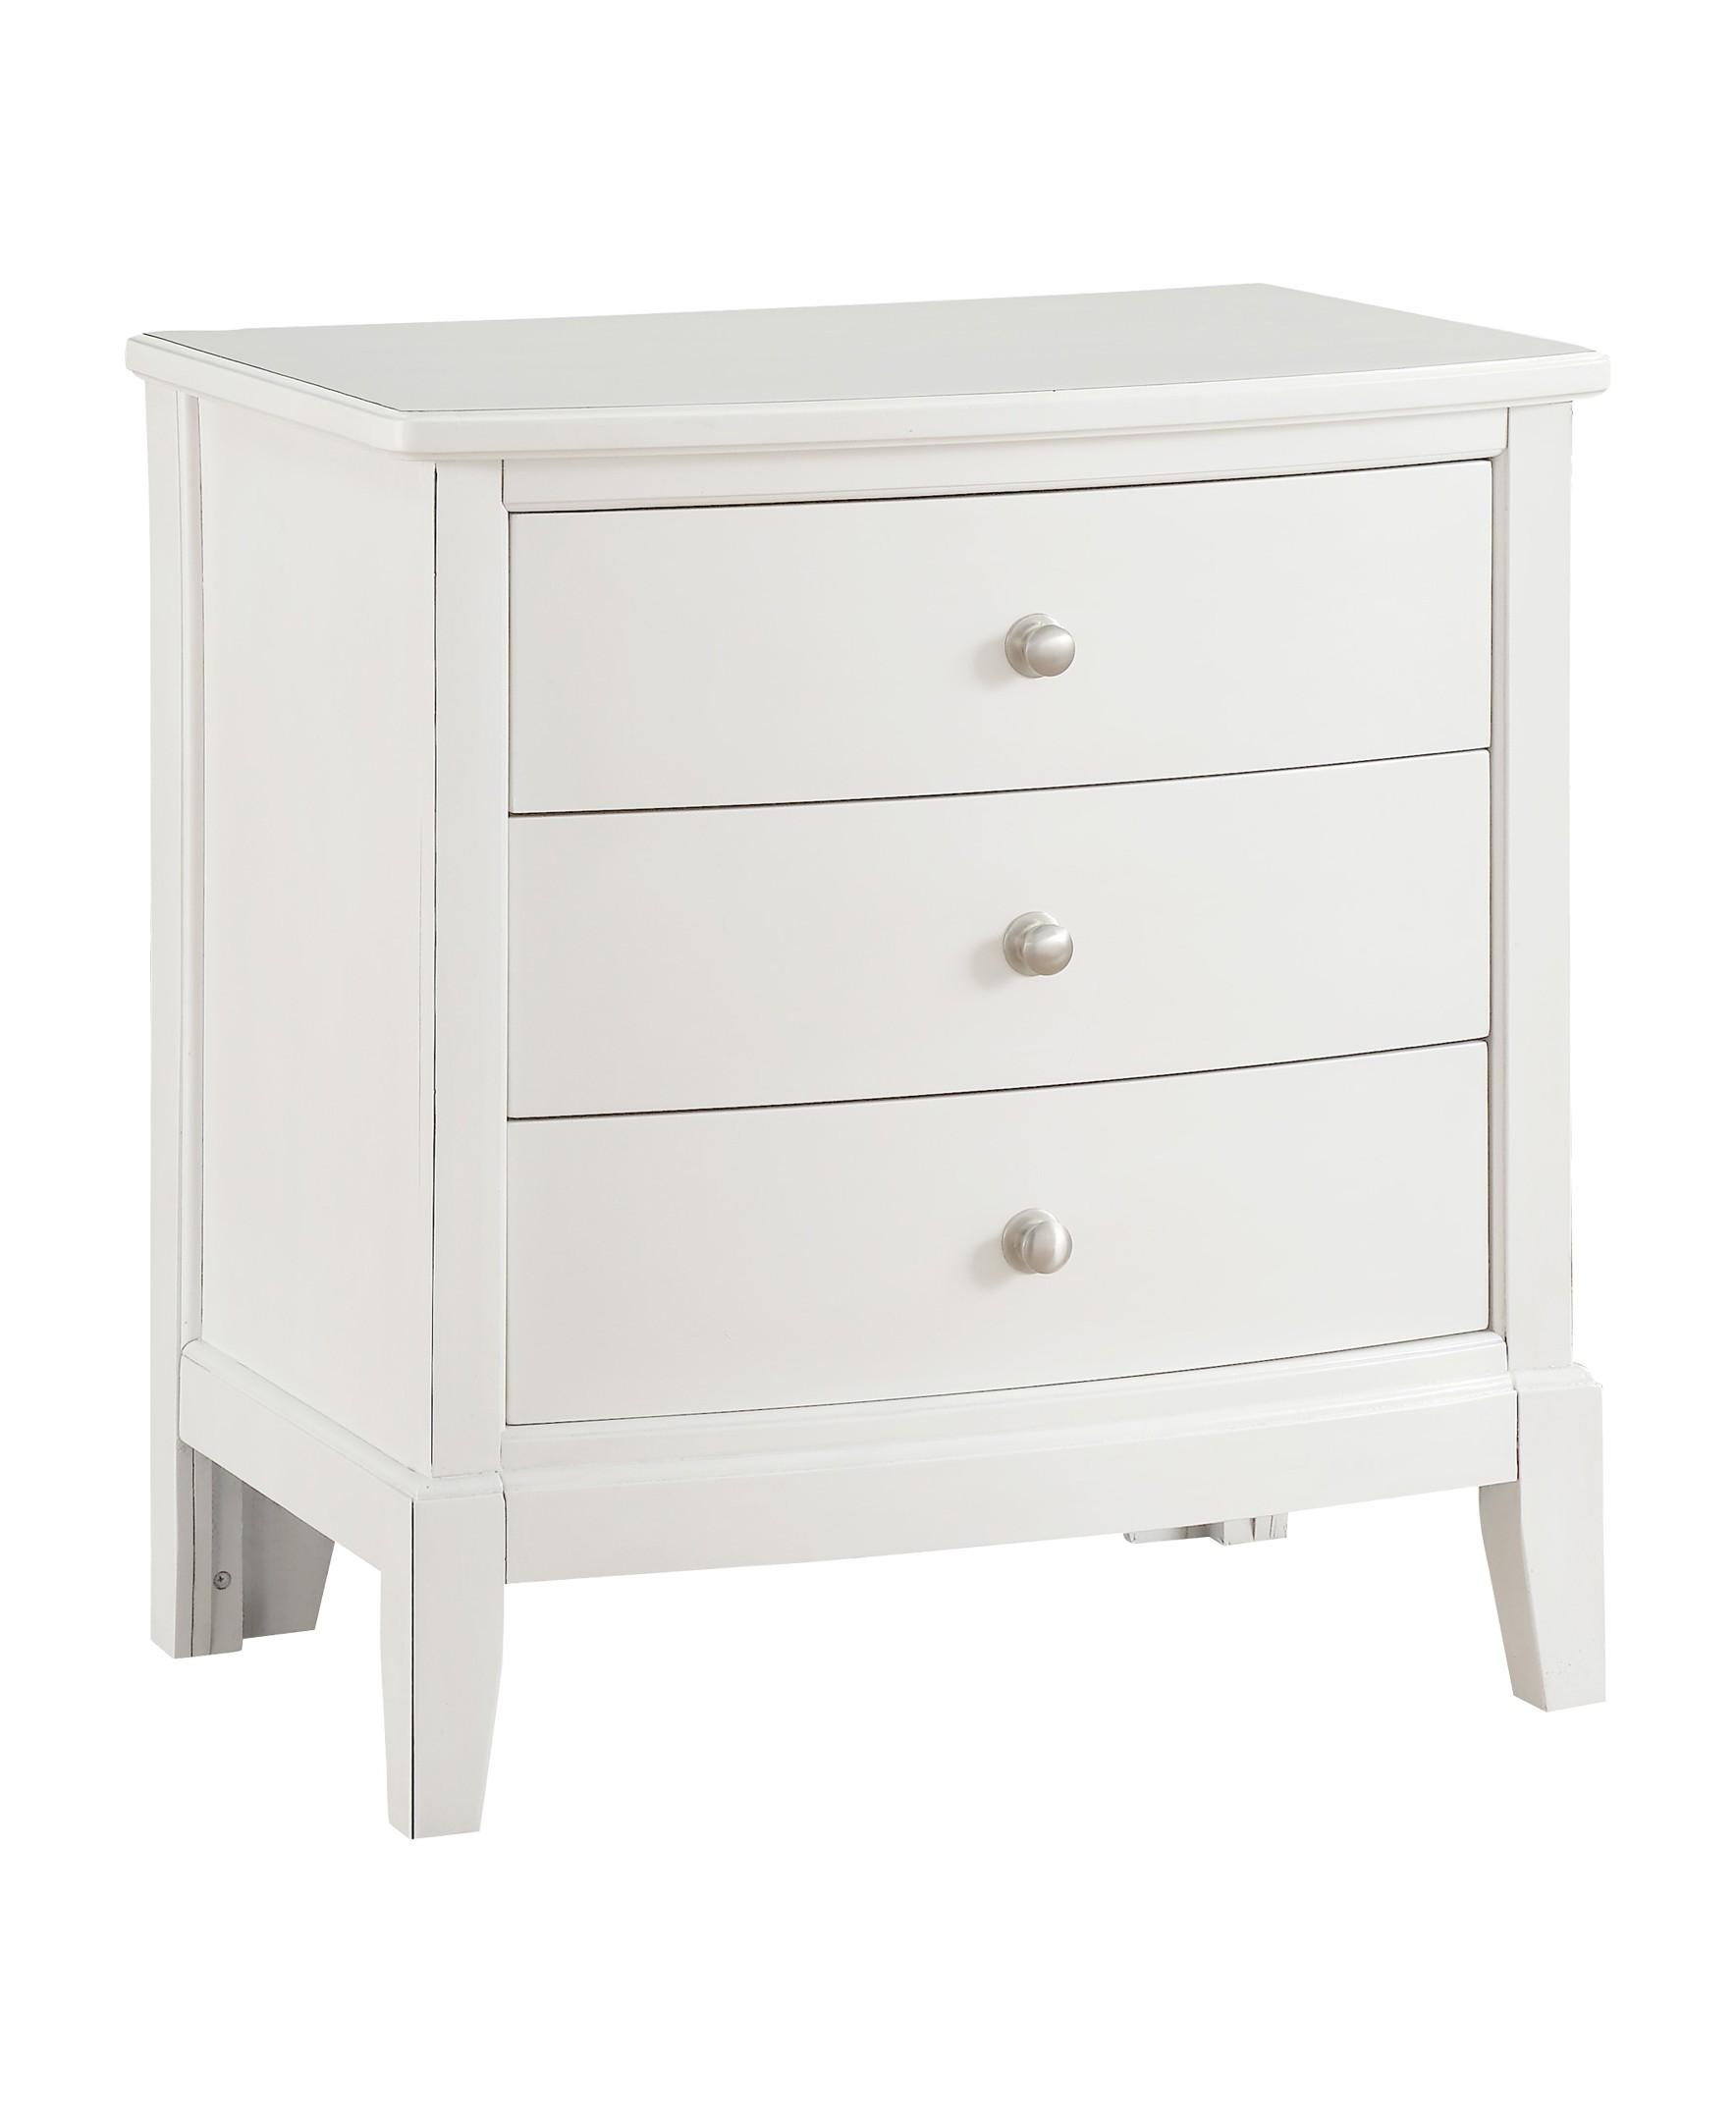 Transitional Nightstand 1730WW-4 Cotterill 1730WW-4 in Antique White 